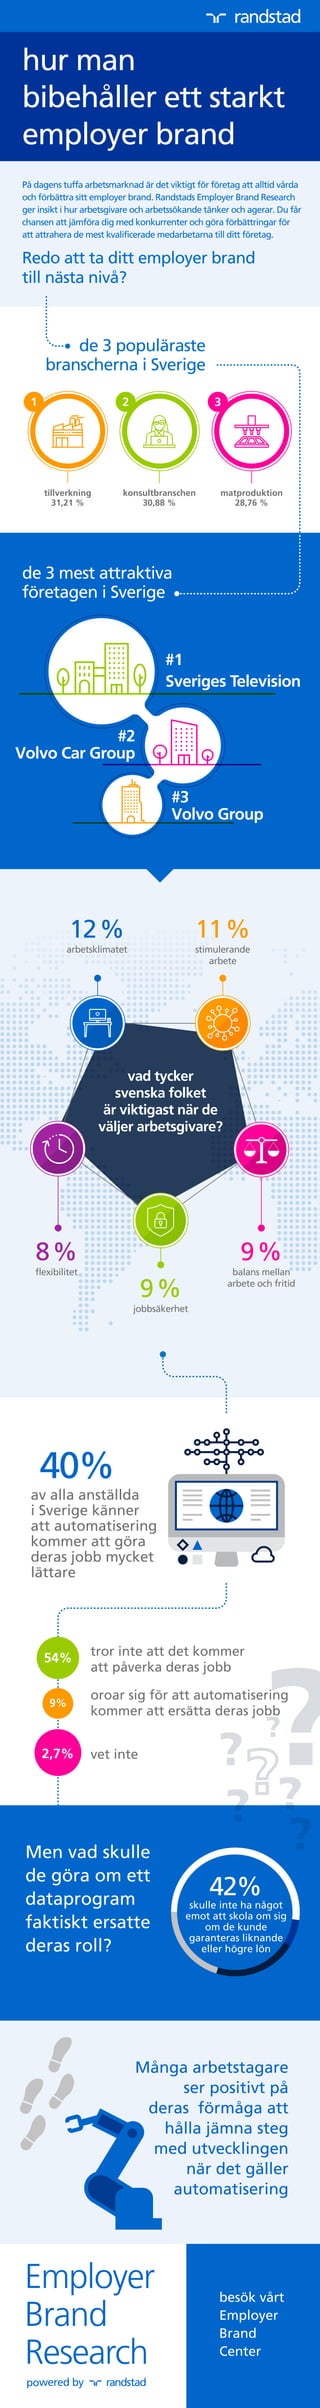 Randstad Employer Brand Research 2017 - Infographic